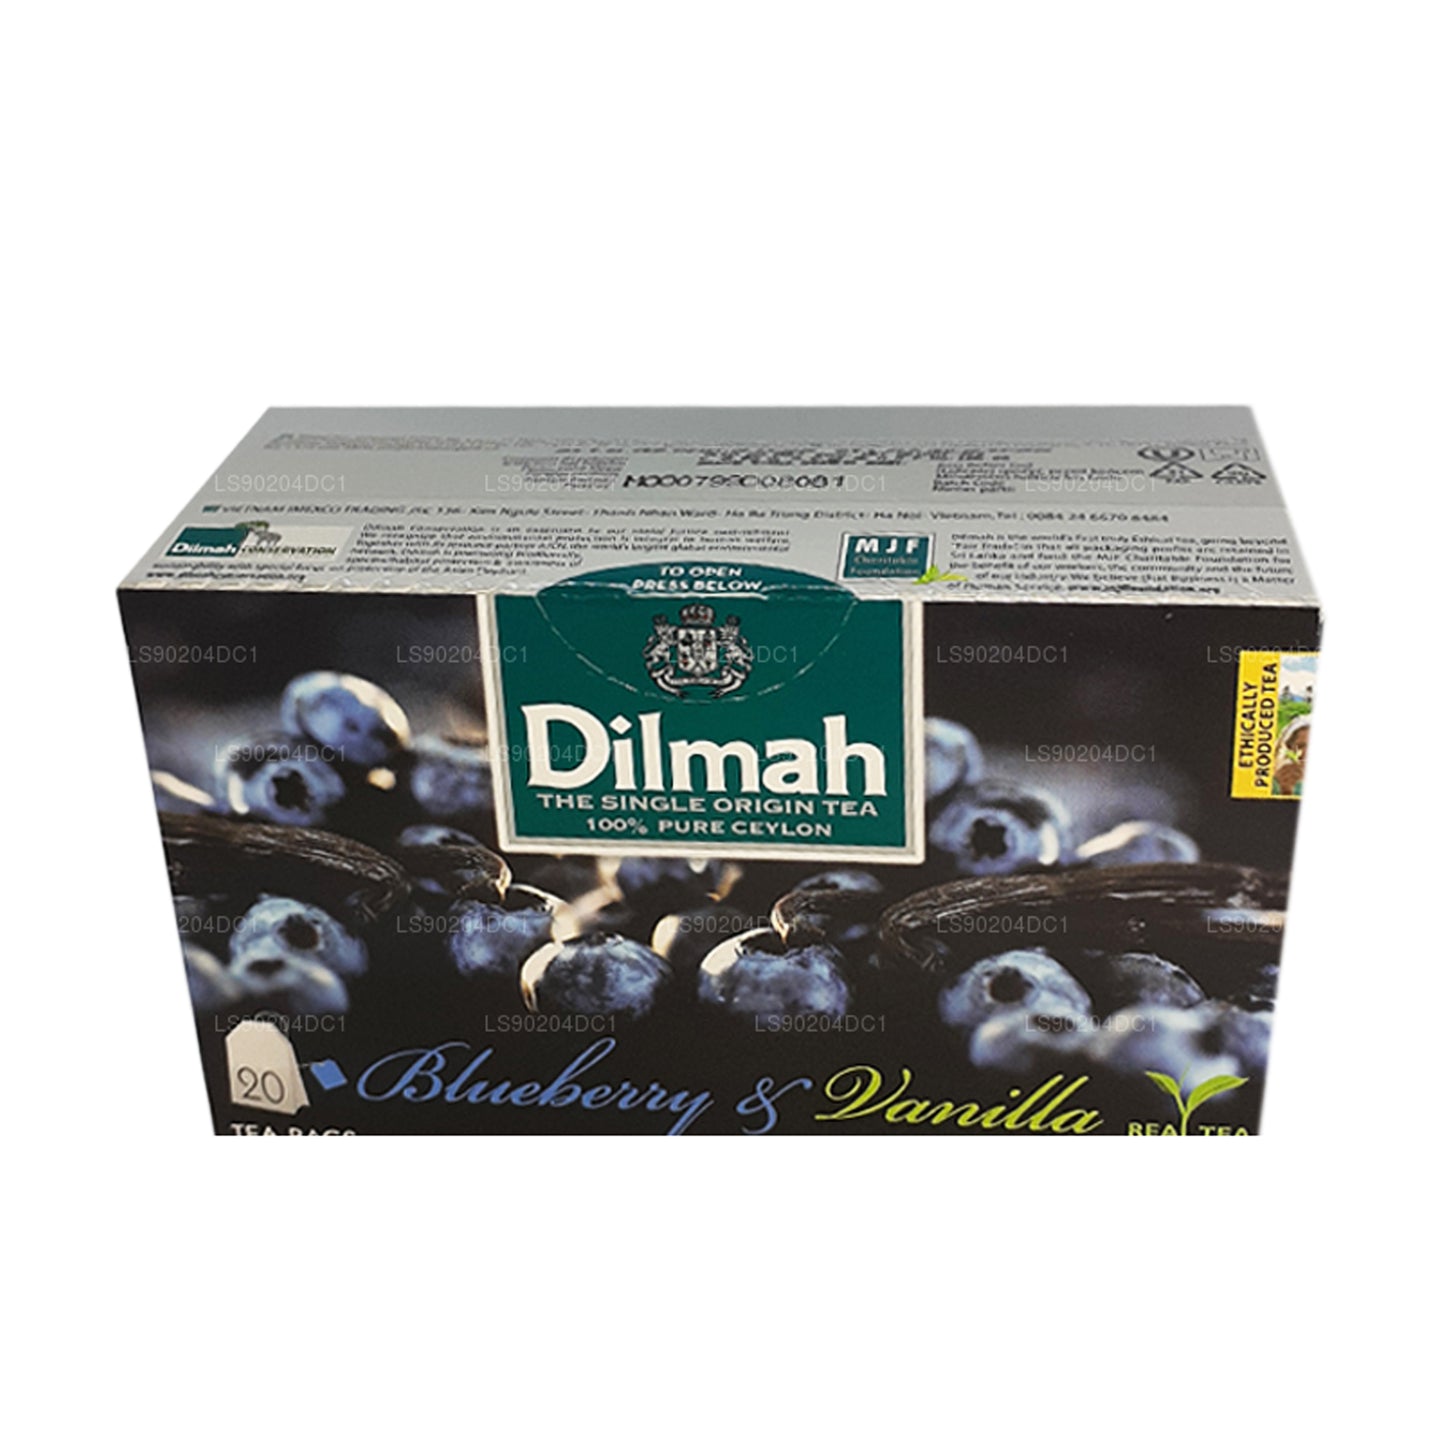 Dilmah Blueberry and Vanilla Flavored Tea (40g) 20 Tea Bags